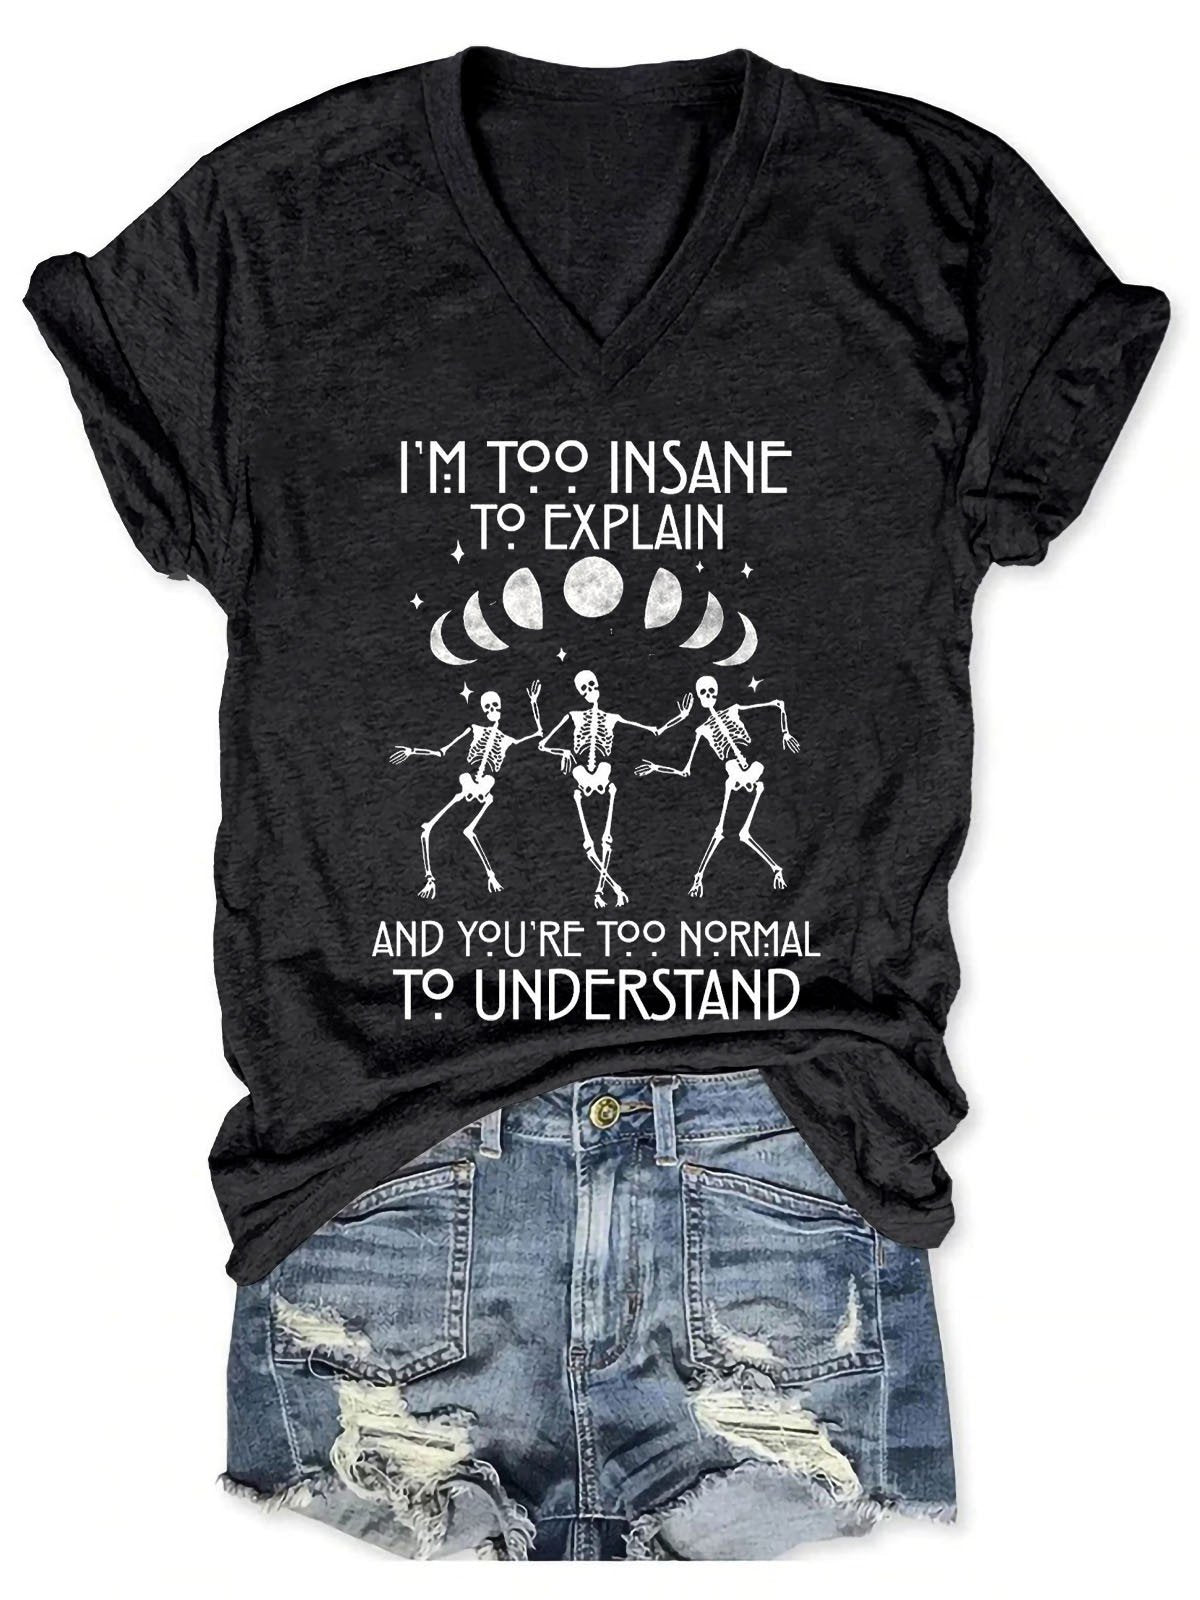 Women I'm Too Insane To Explain And You're Too Normal To Understand V-Neck T-Shirt - Outlets Forever